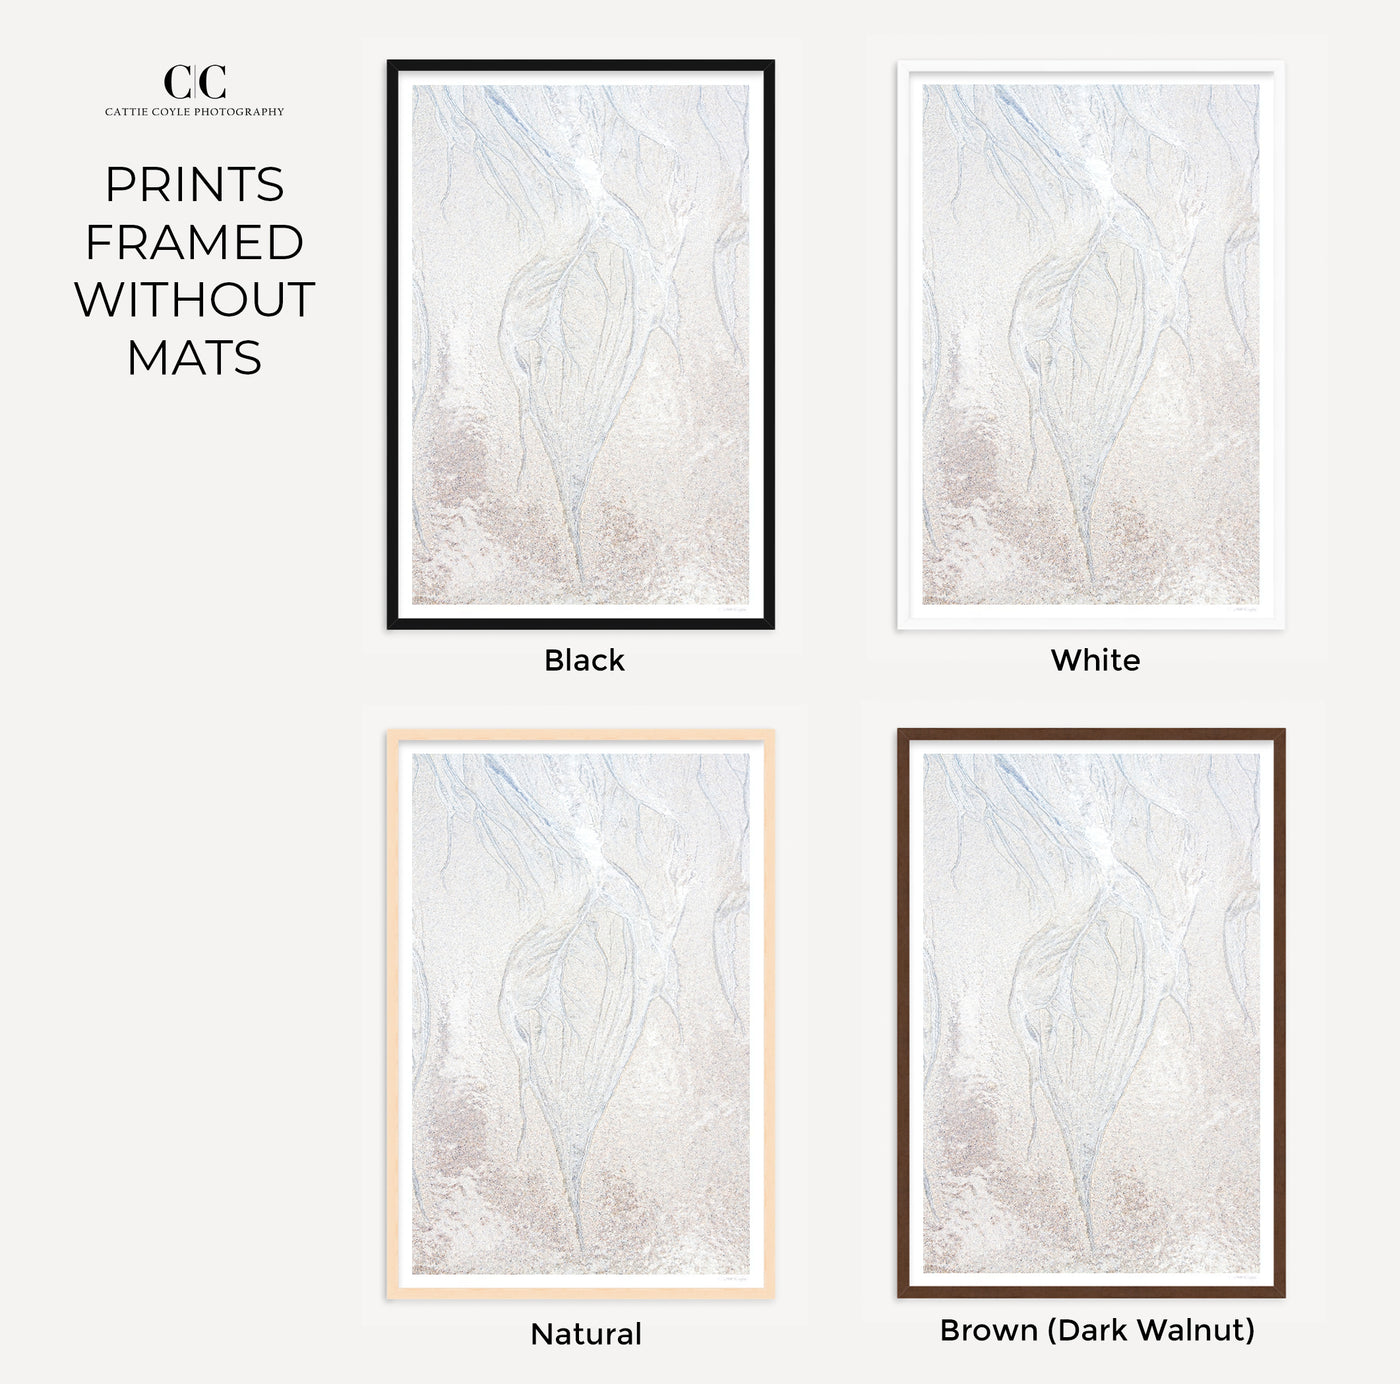 Abstract photography prints by Cattie Coyle framed without mats